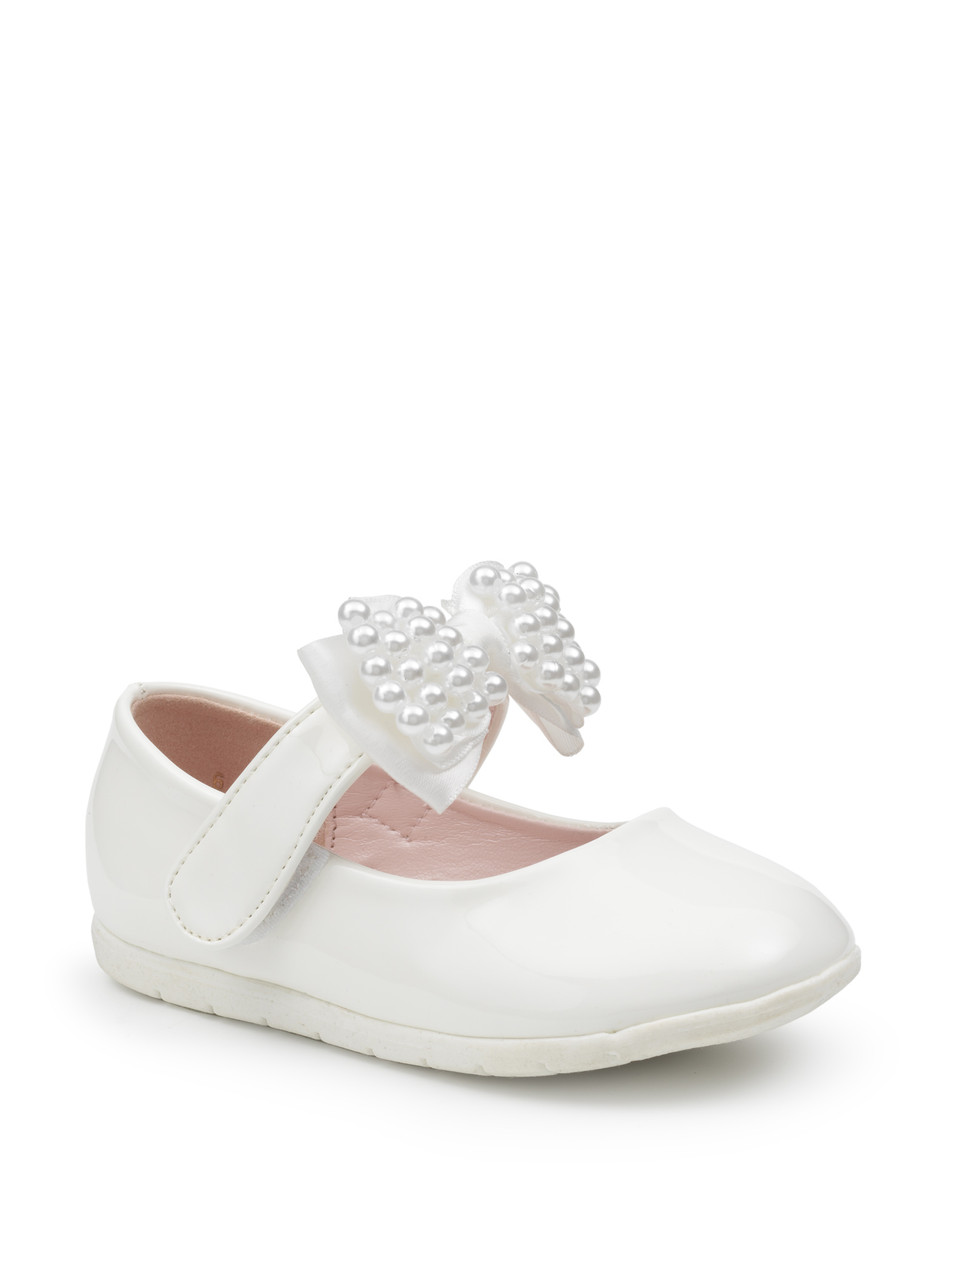 Baby girls ivory shoes | Girls Christening shoes